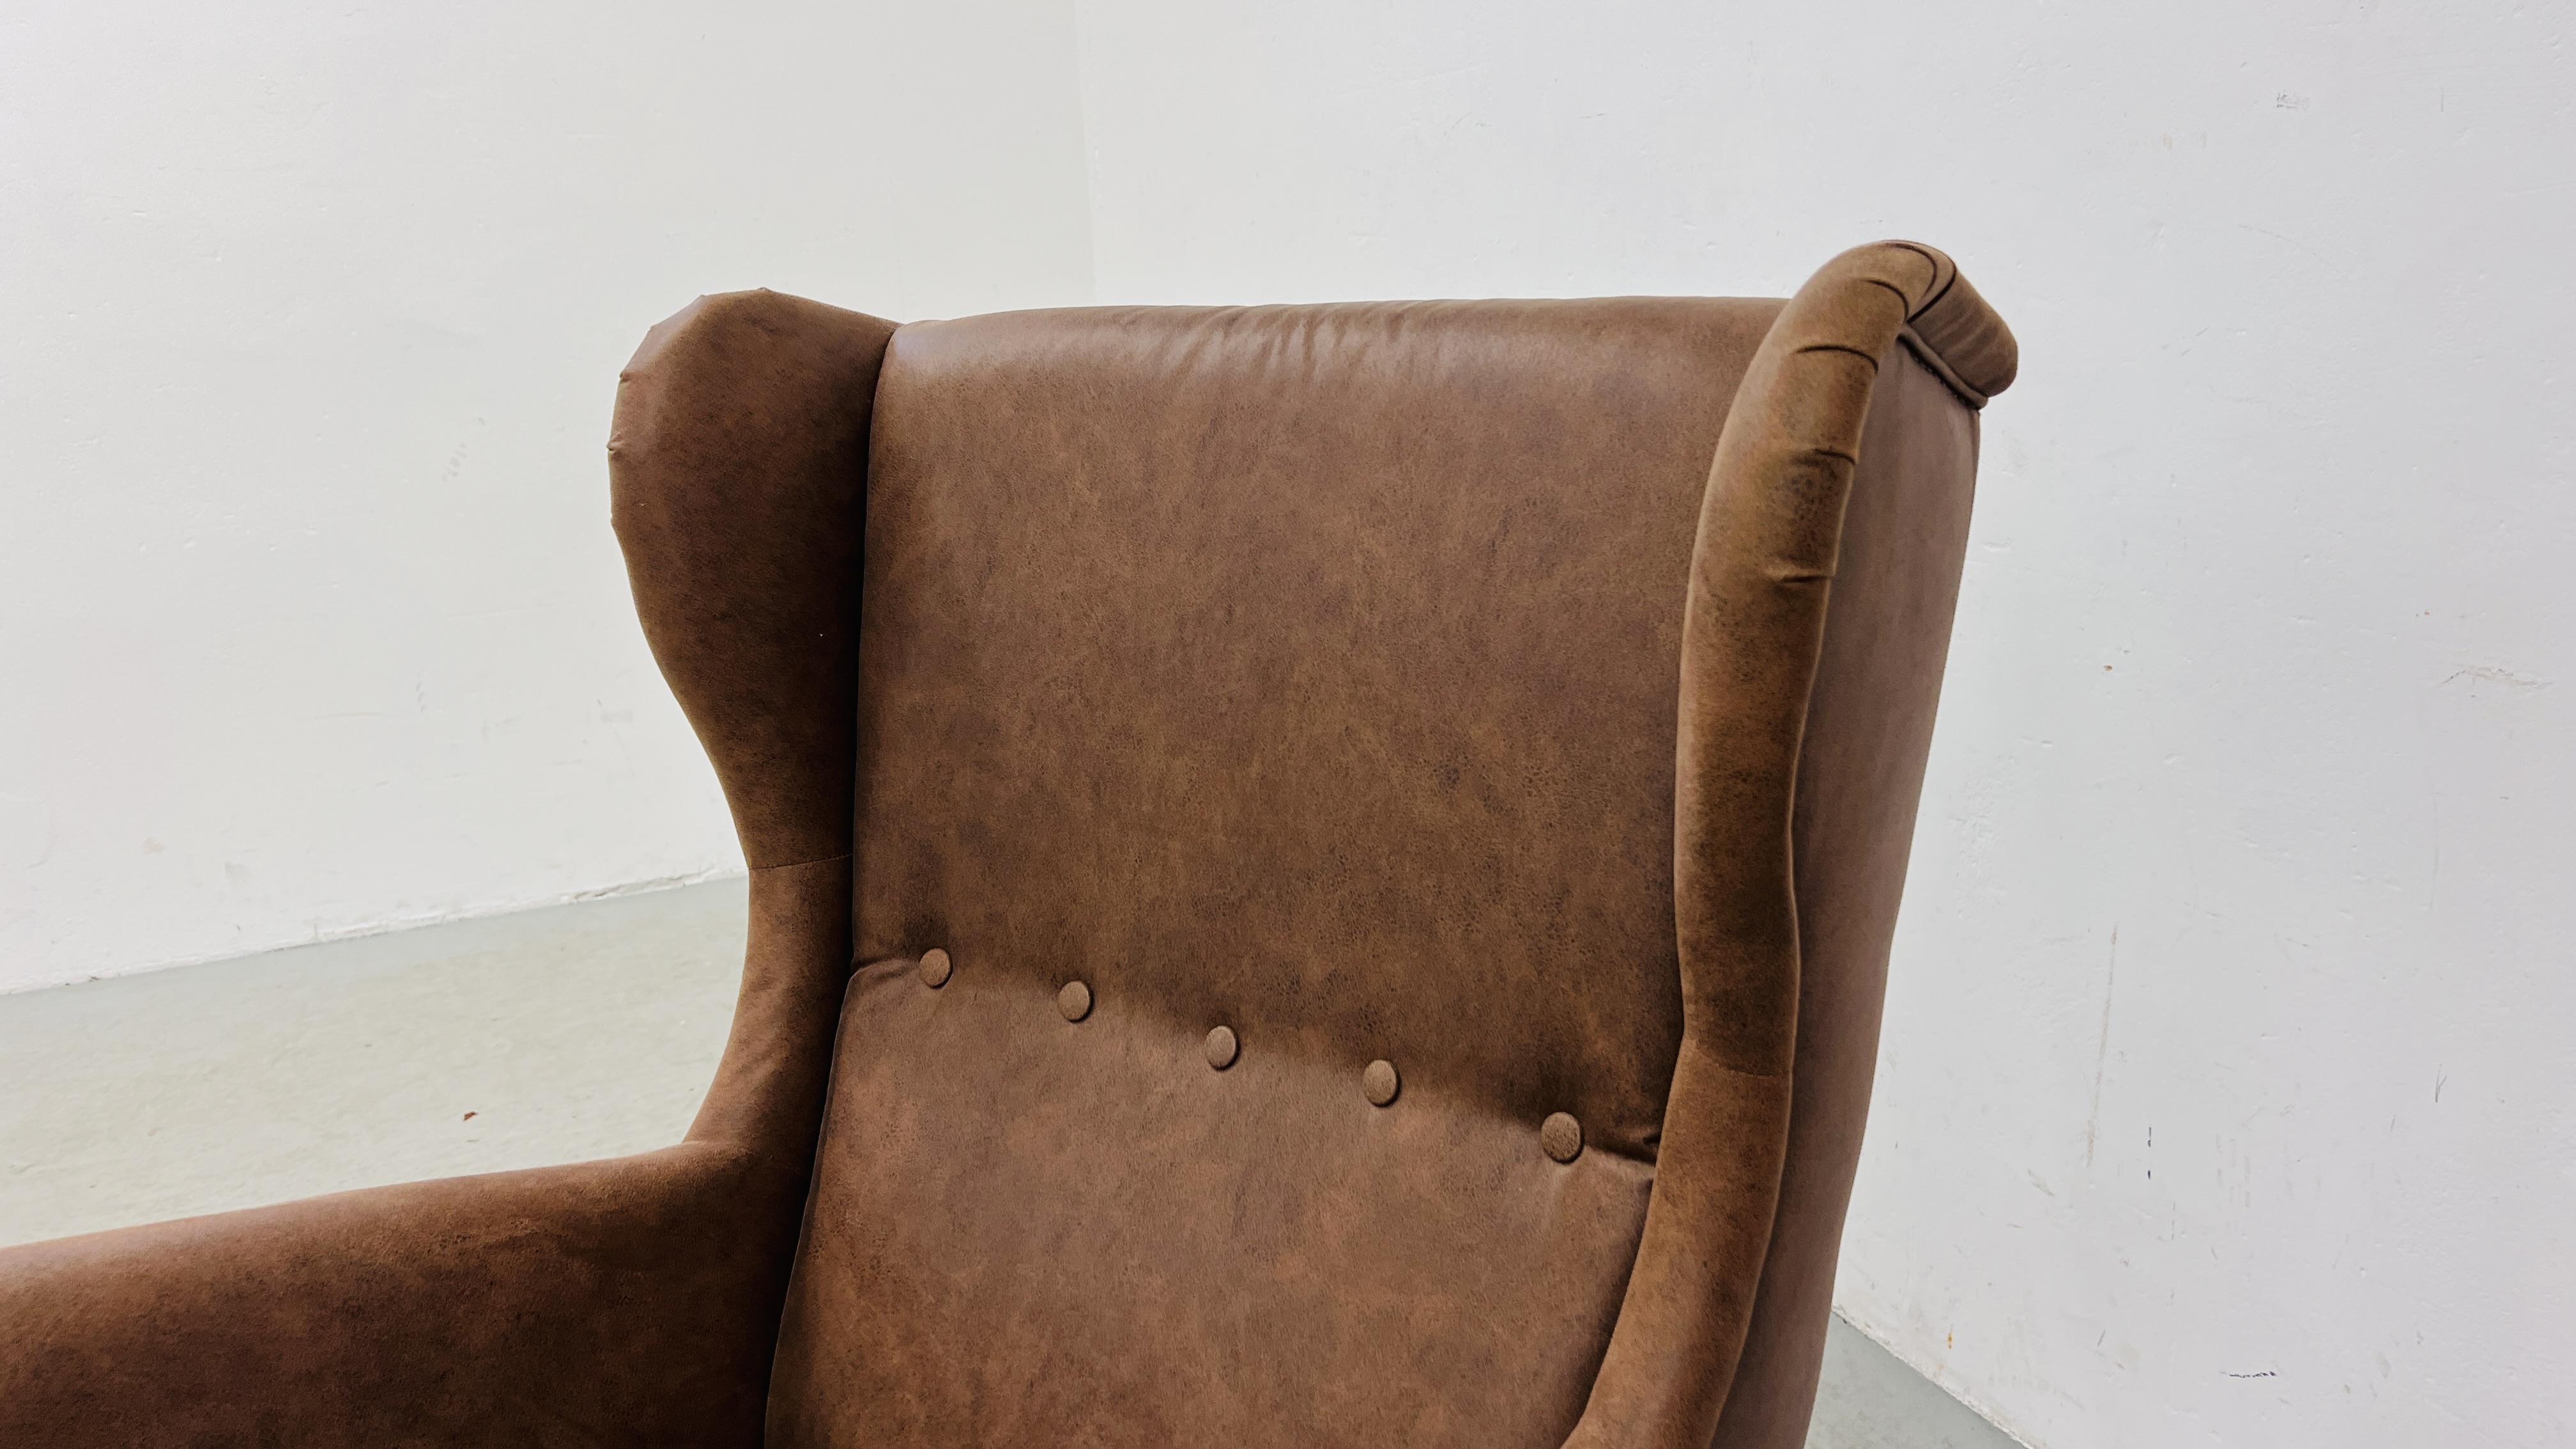 A MODEERN IKEA DESIGNER WINGED ARM CHAIR FAUX BROWN SUEDE UPHOLSTERTY - Image 2 of 7